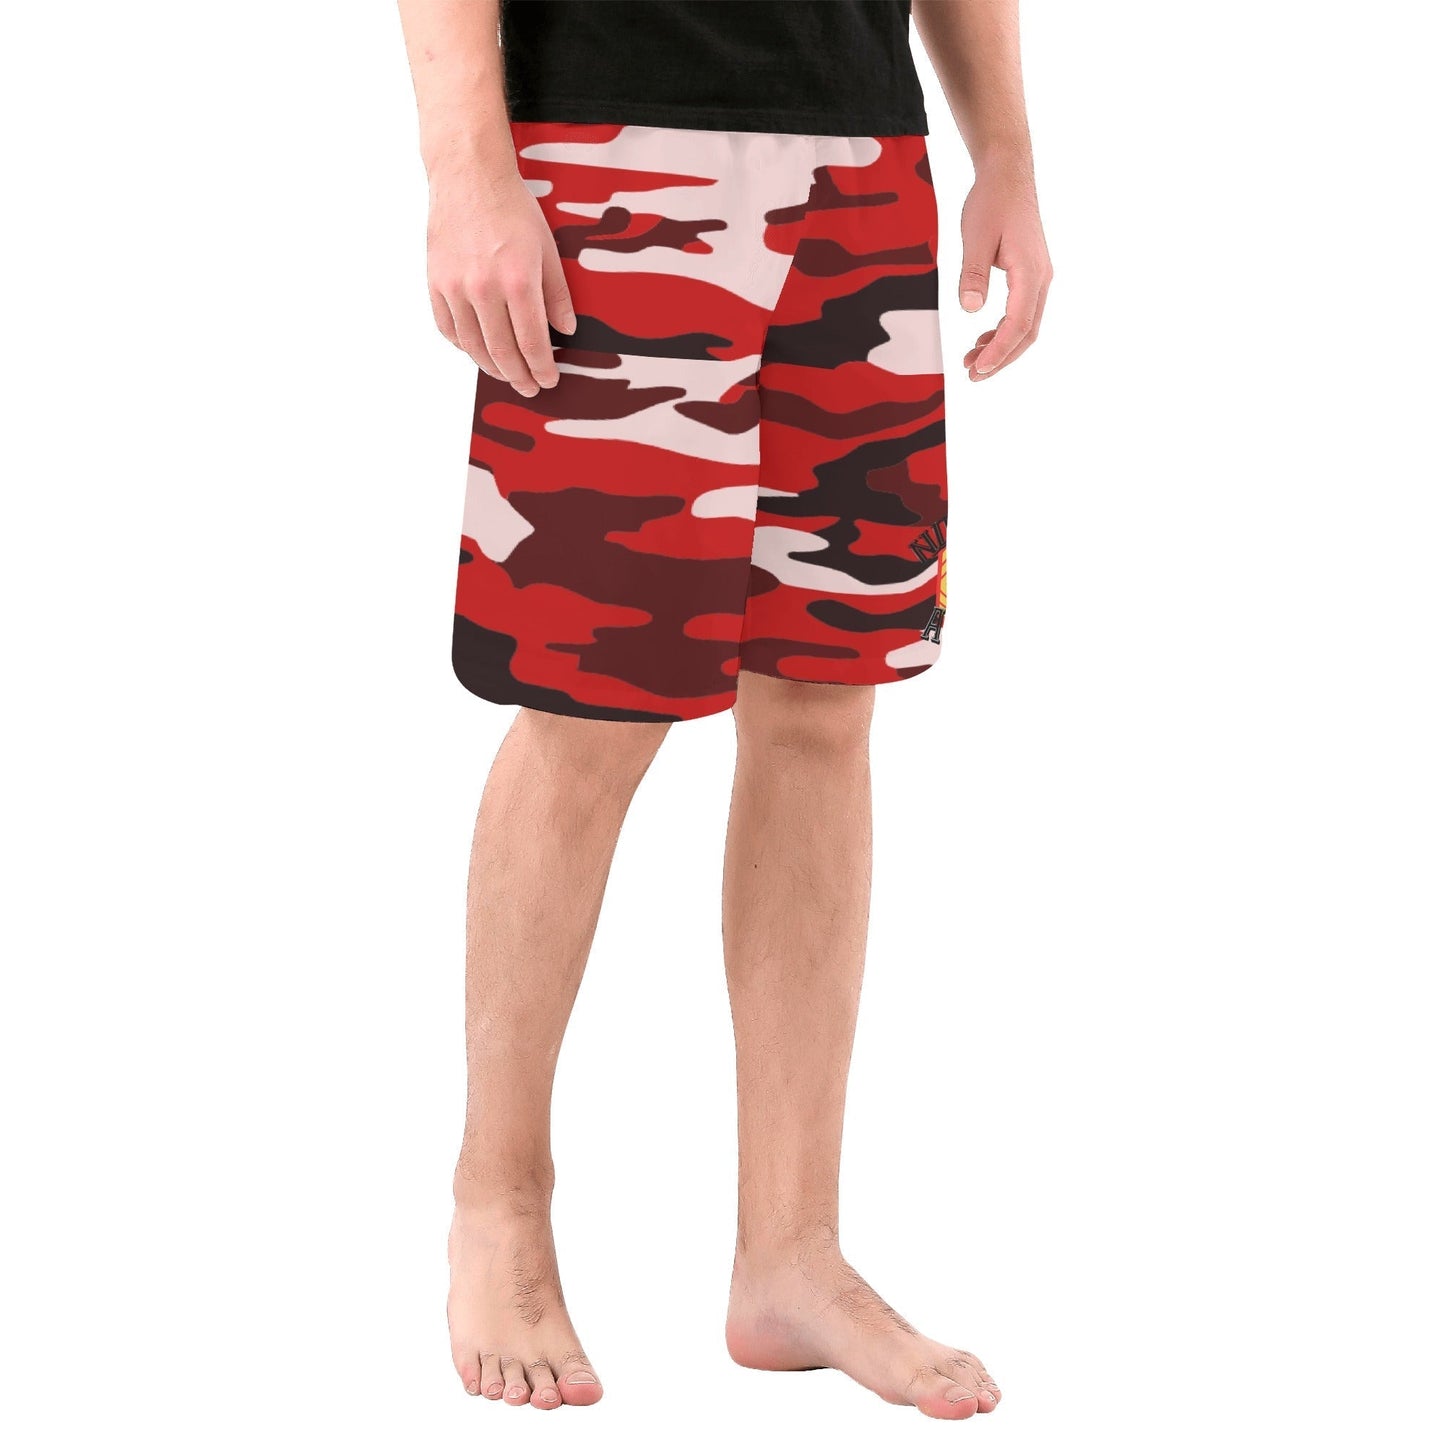 Stand out  with the  Nugget Army Mens Board Shorts  available at Hey Nugget. Grab yours today!